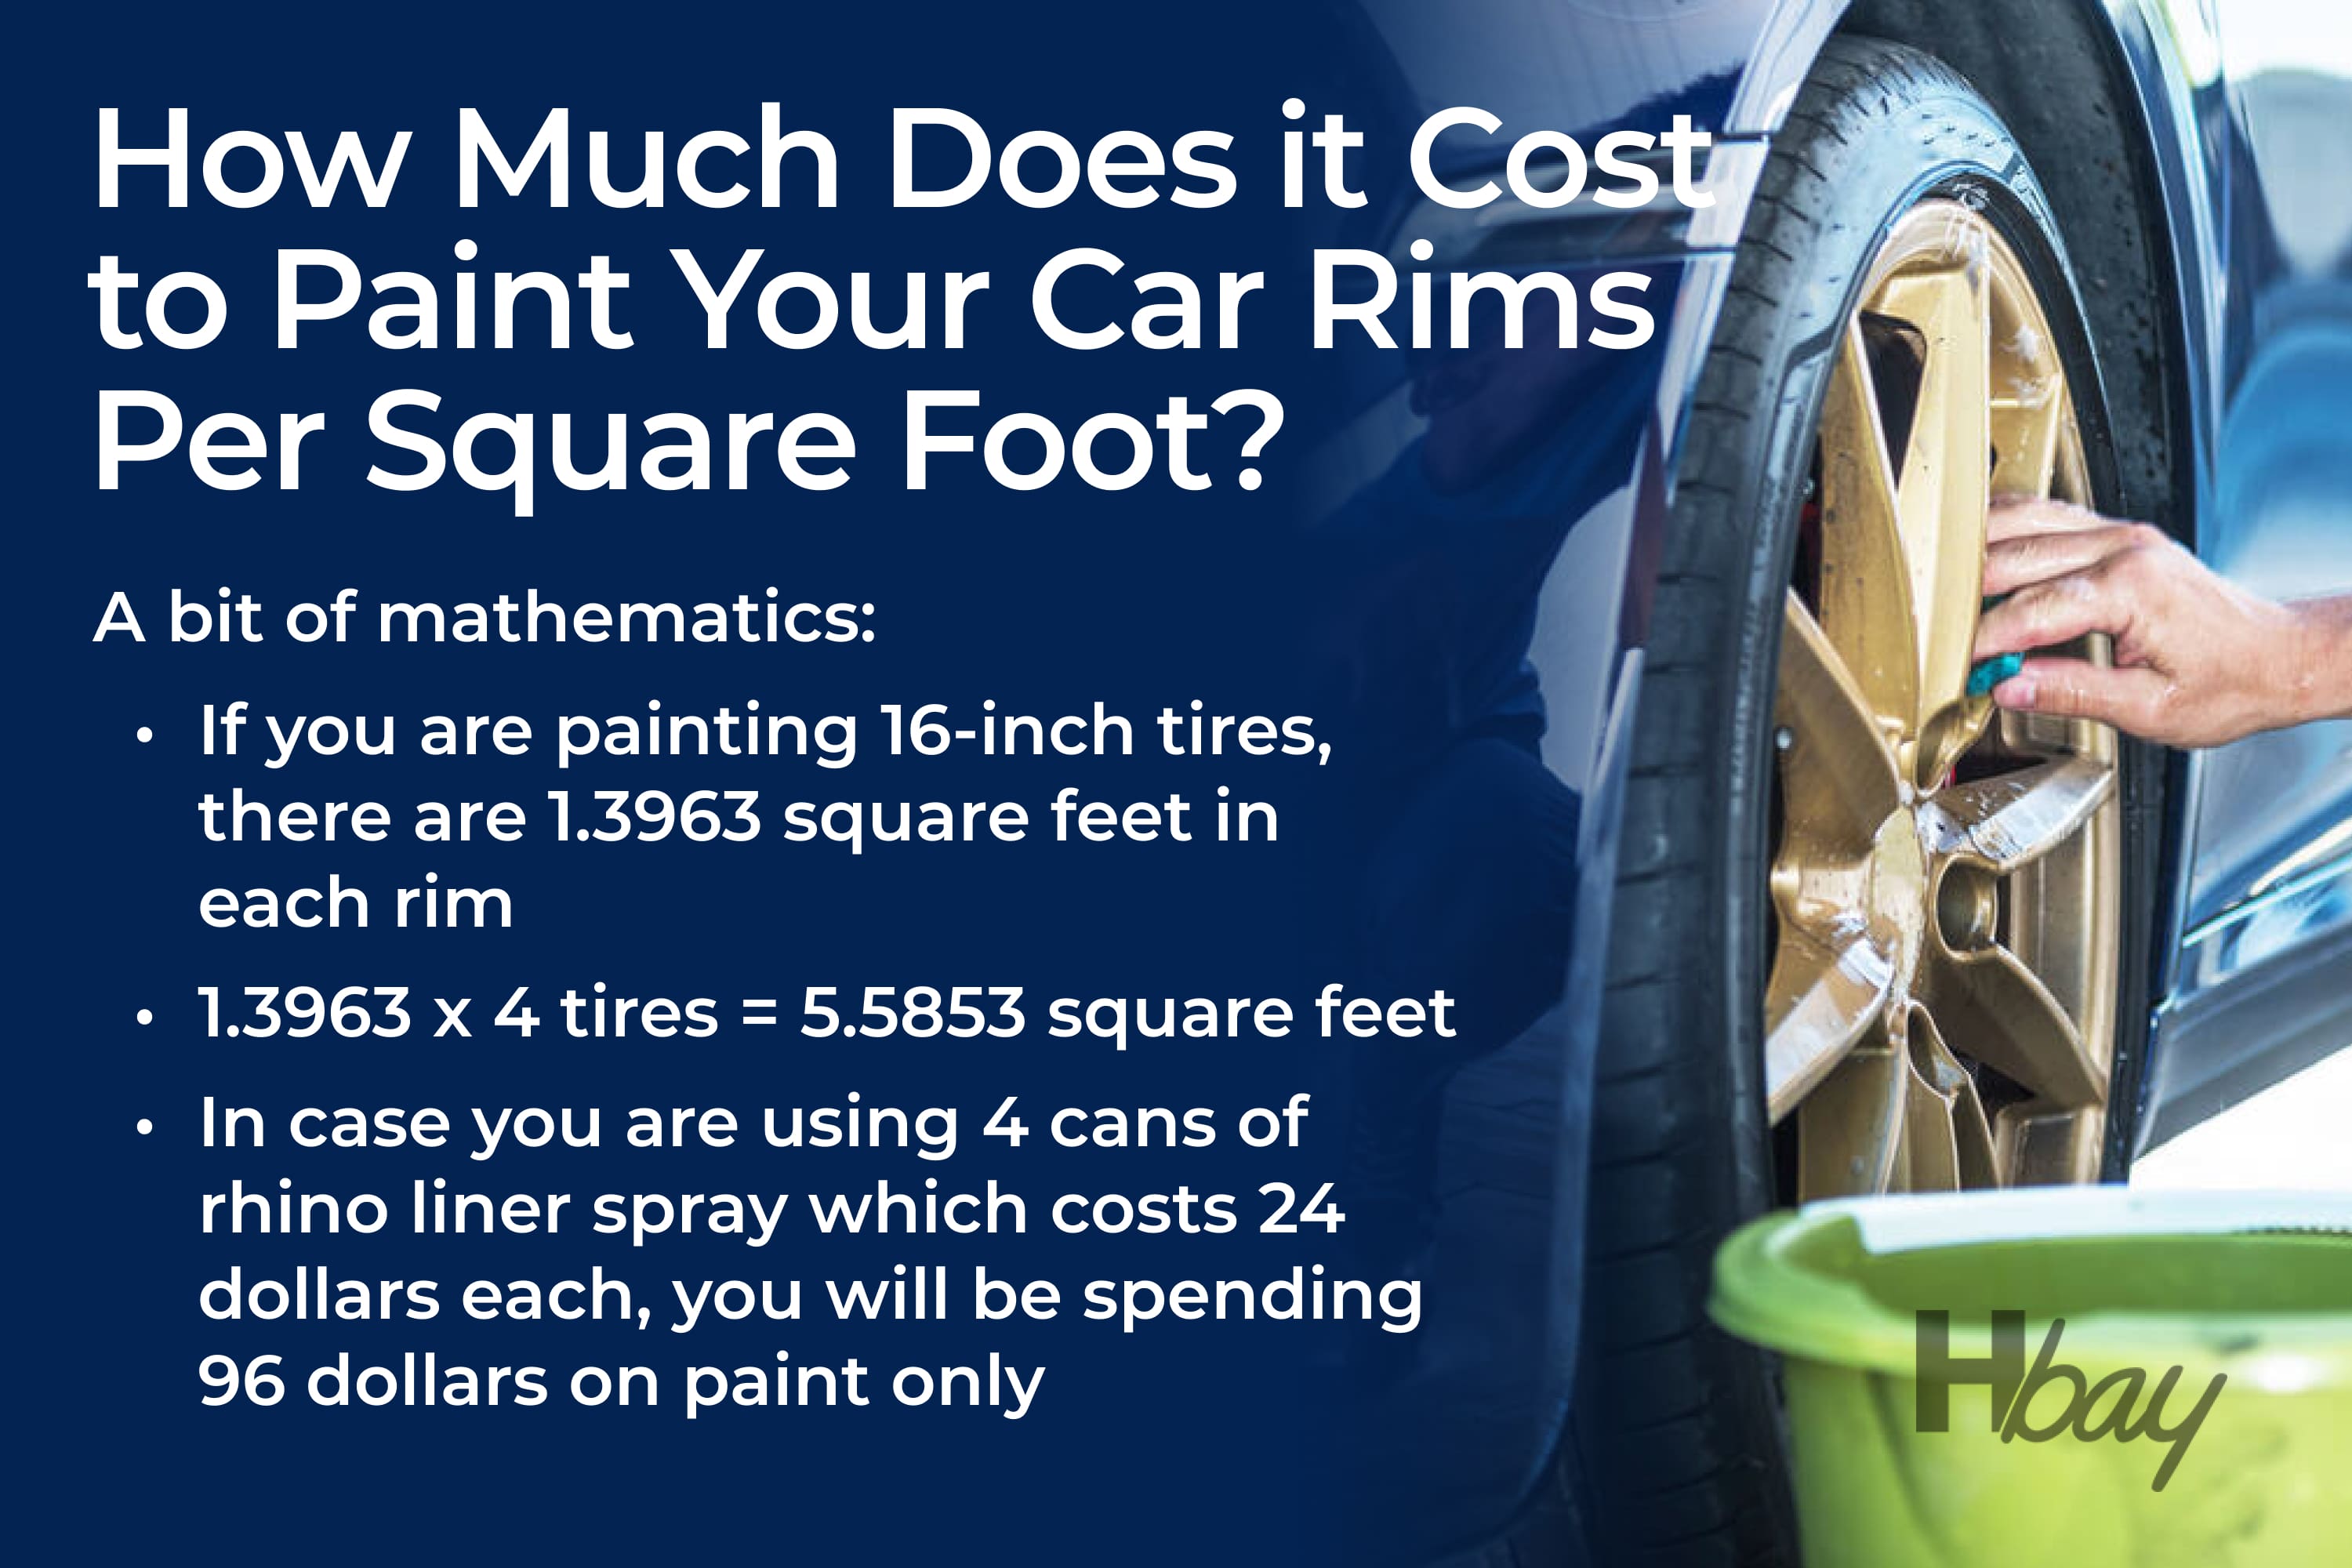 How Much Does It Cost to Paint Your Car Rims Per Square Foot